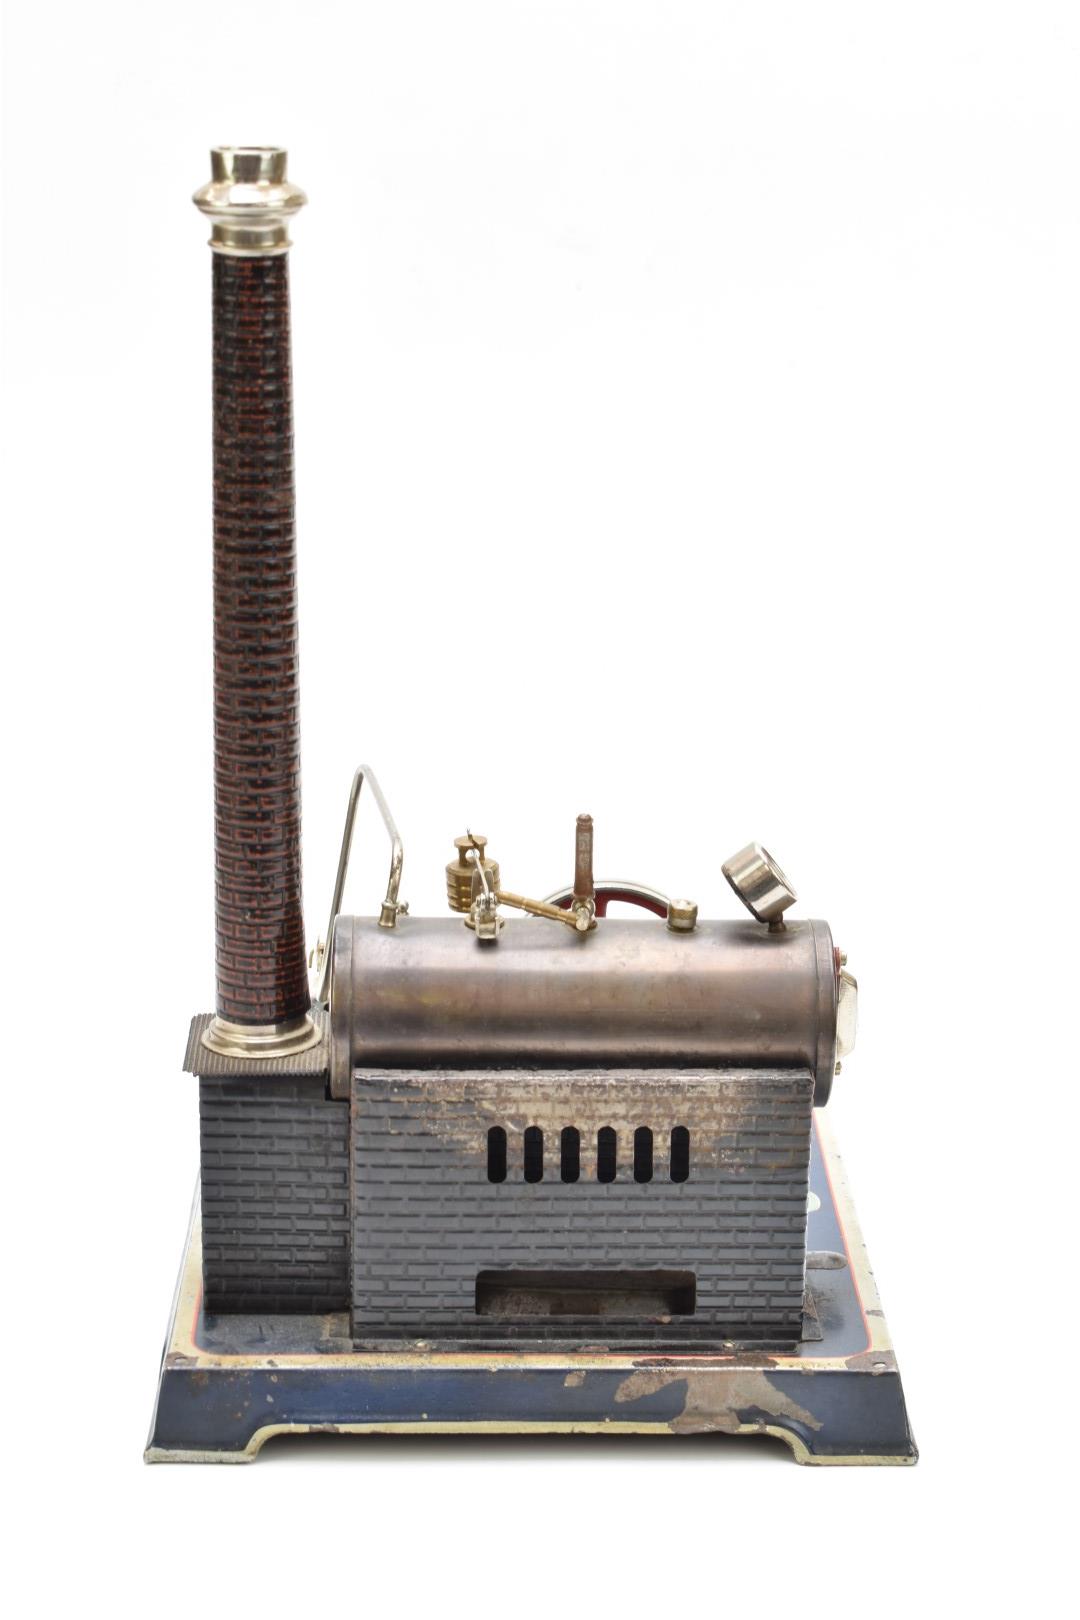 Doll and Cie stationary live steam engine, the boiler with faux brickwork base and chimney, the - Image 3 of 6